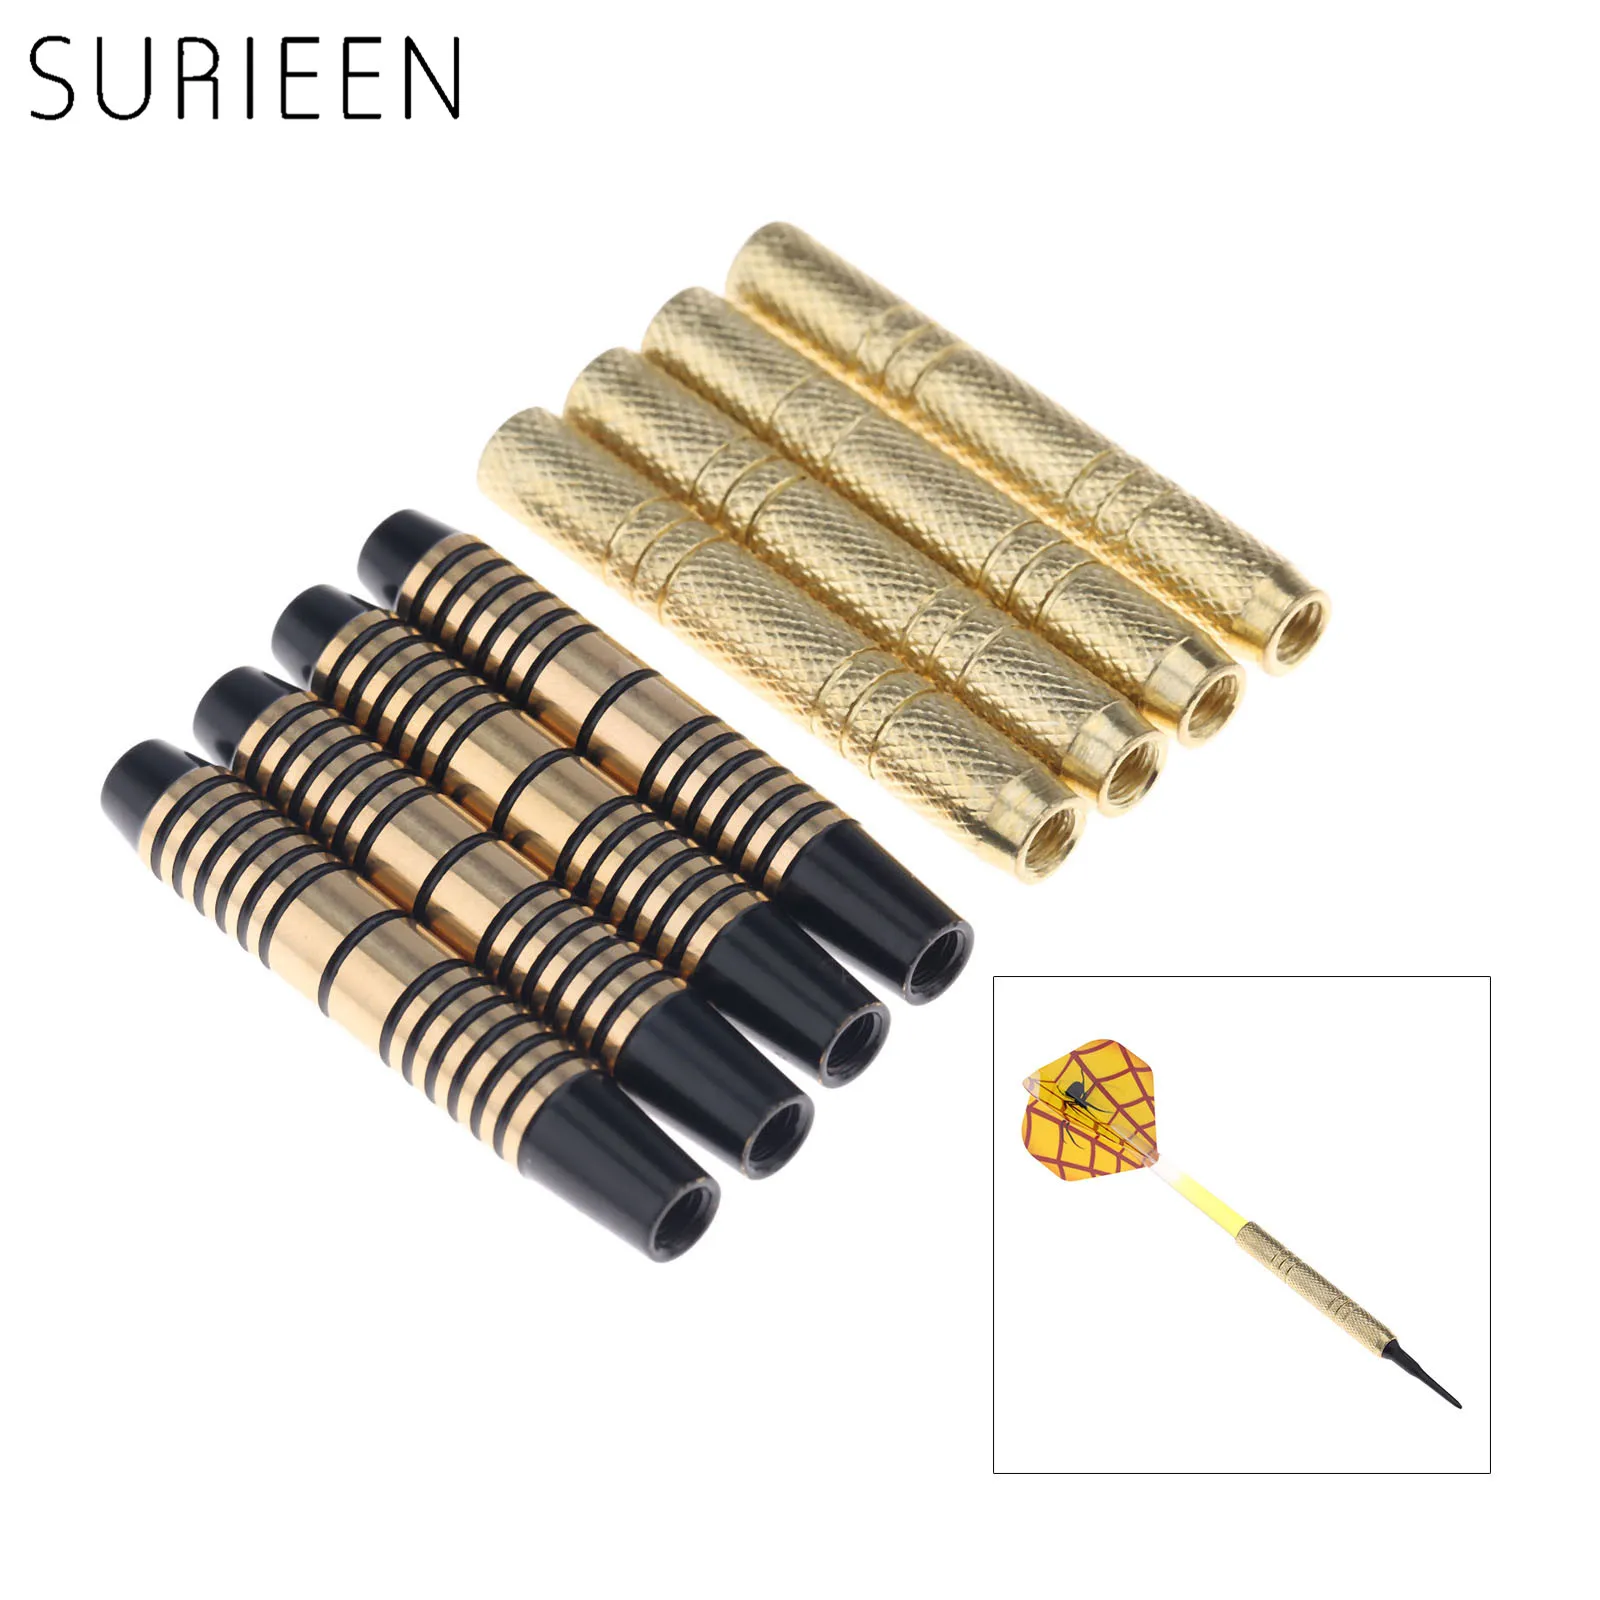 SURIEEN 4 pieces Professional Copper Dart Barrel for Nylon/Steel darts tip Dart Accessories 47mm-12g / 49mm-16g with 2BA Thread 4sets if4939ss stainless steel speaker spikes adjustable damping feet isolation stand pads base mat hifi mounts large size 49mm